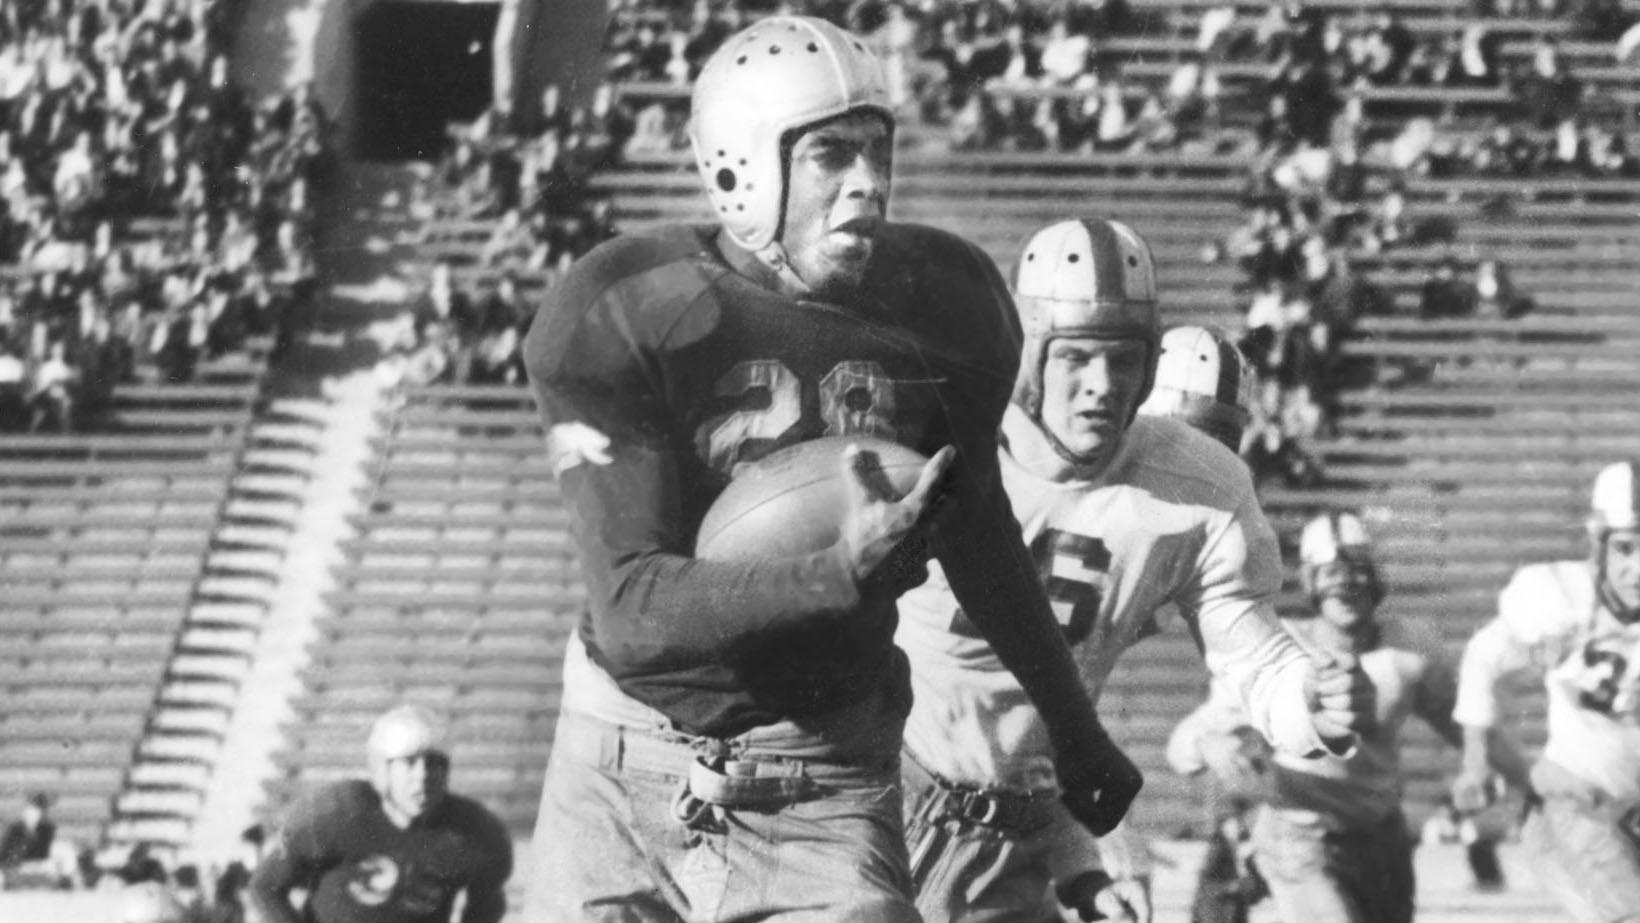 Jackie Robinson wore No. 28 for UCLA's football team. In this file photo, he's playing for the Bruins against Stanford.